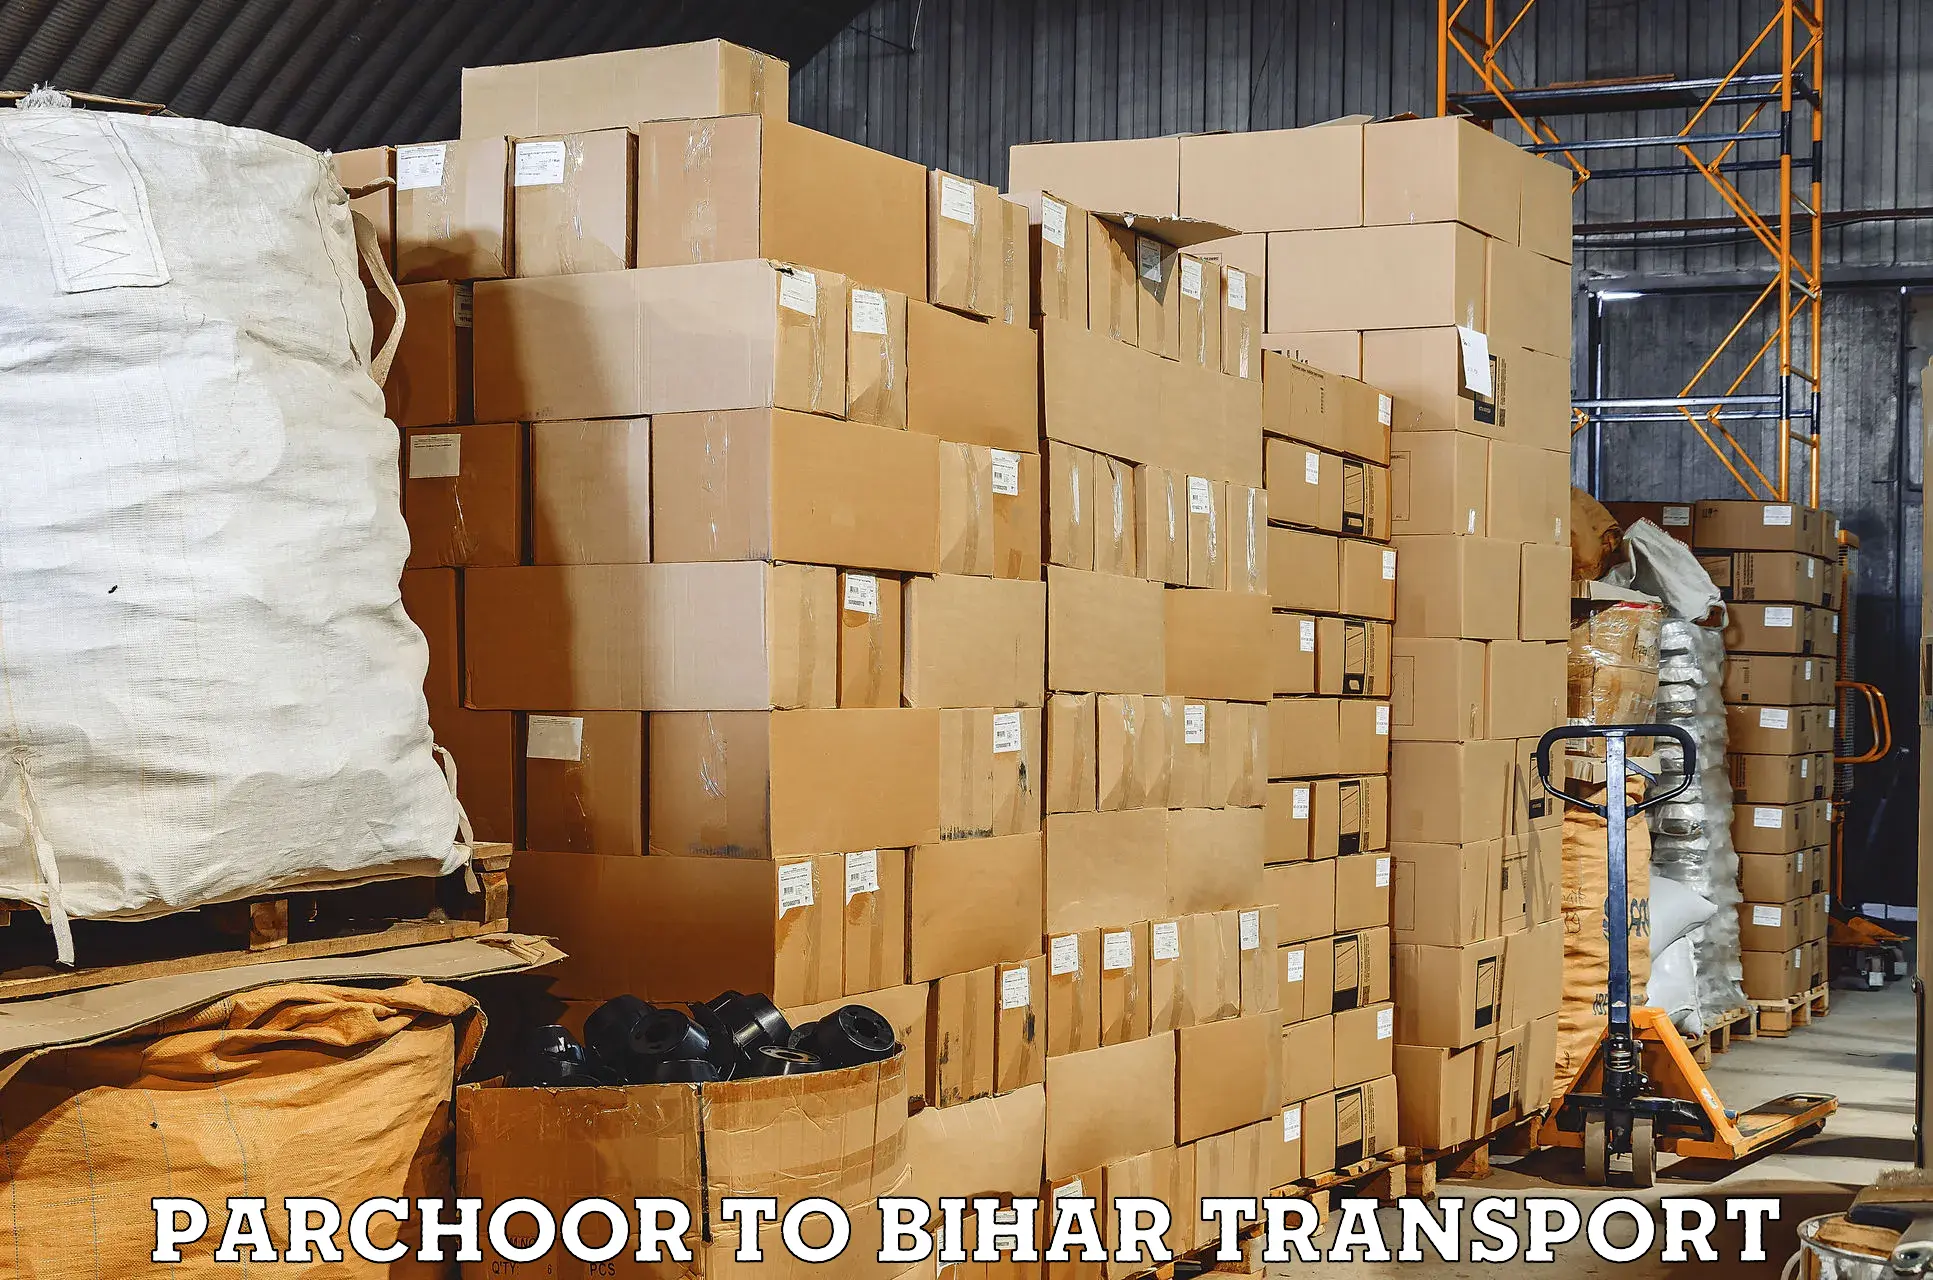 Express transport services Parchoor to Jehanabad